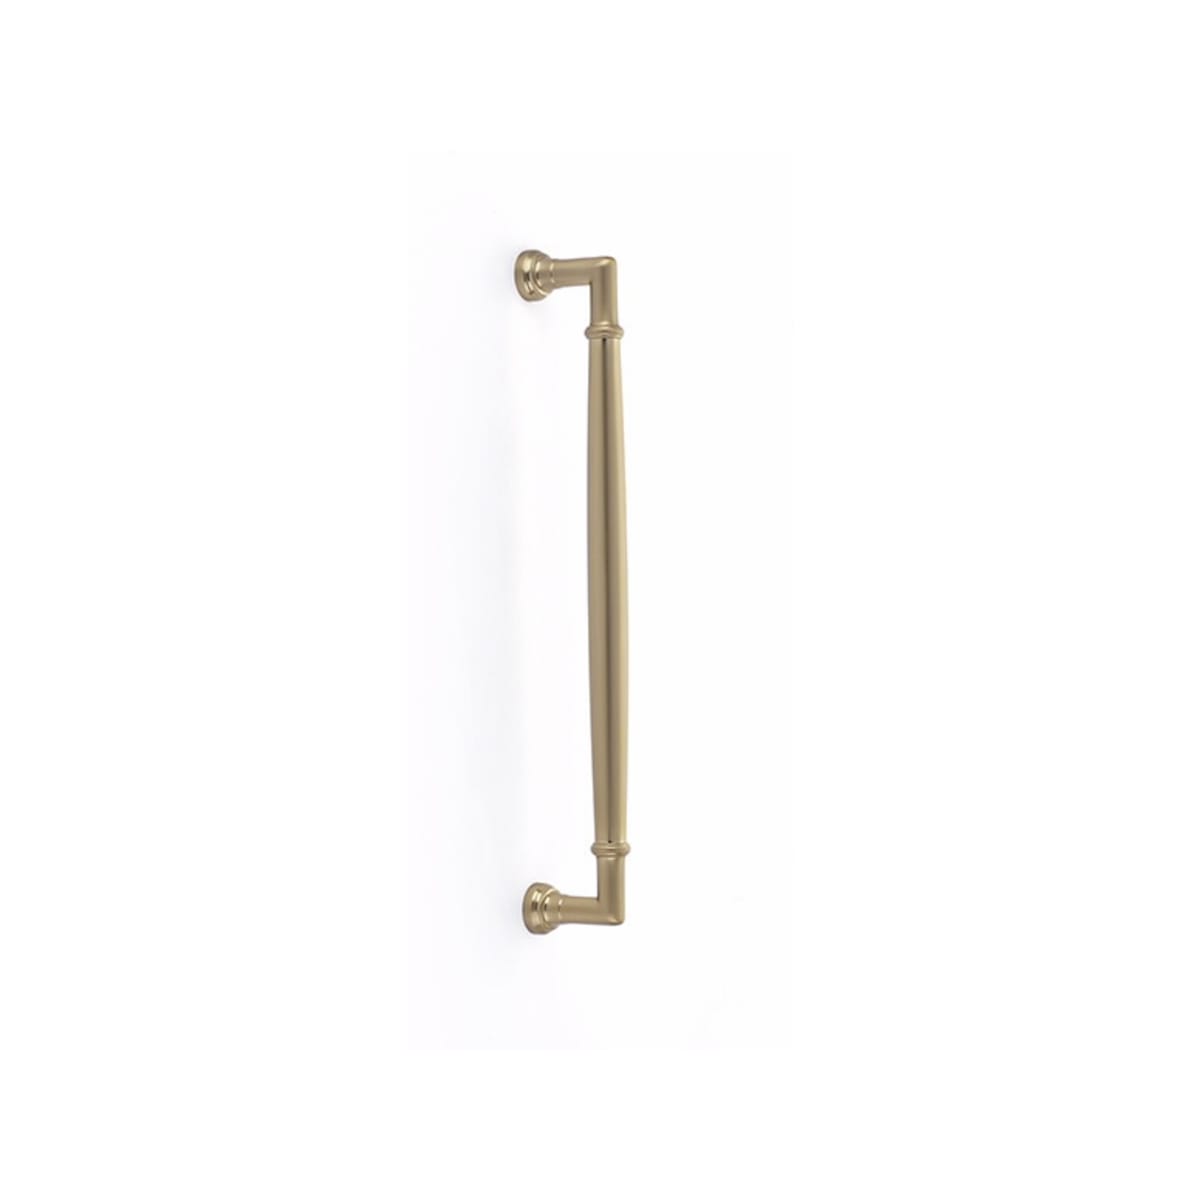 BTB86913US4 - Back to Back Westwood Appliance Pull - 18" - Satin Brass